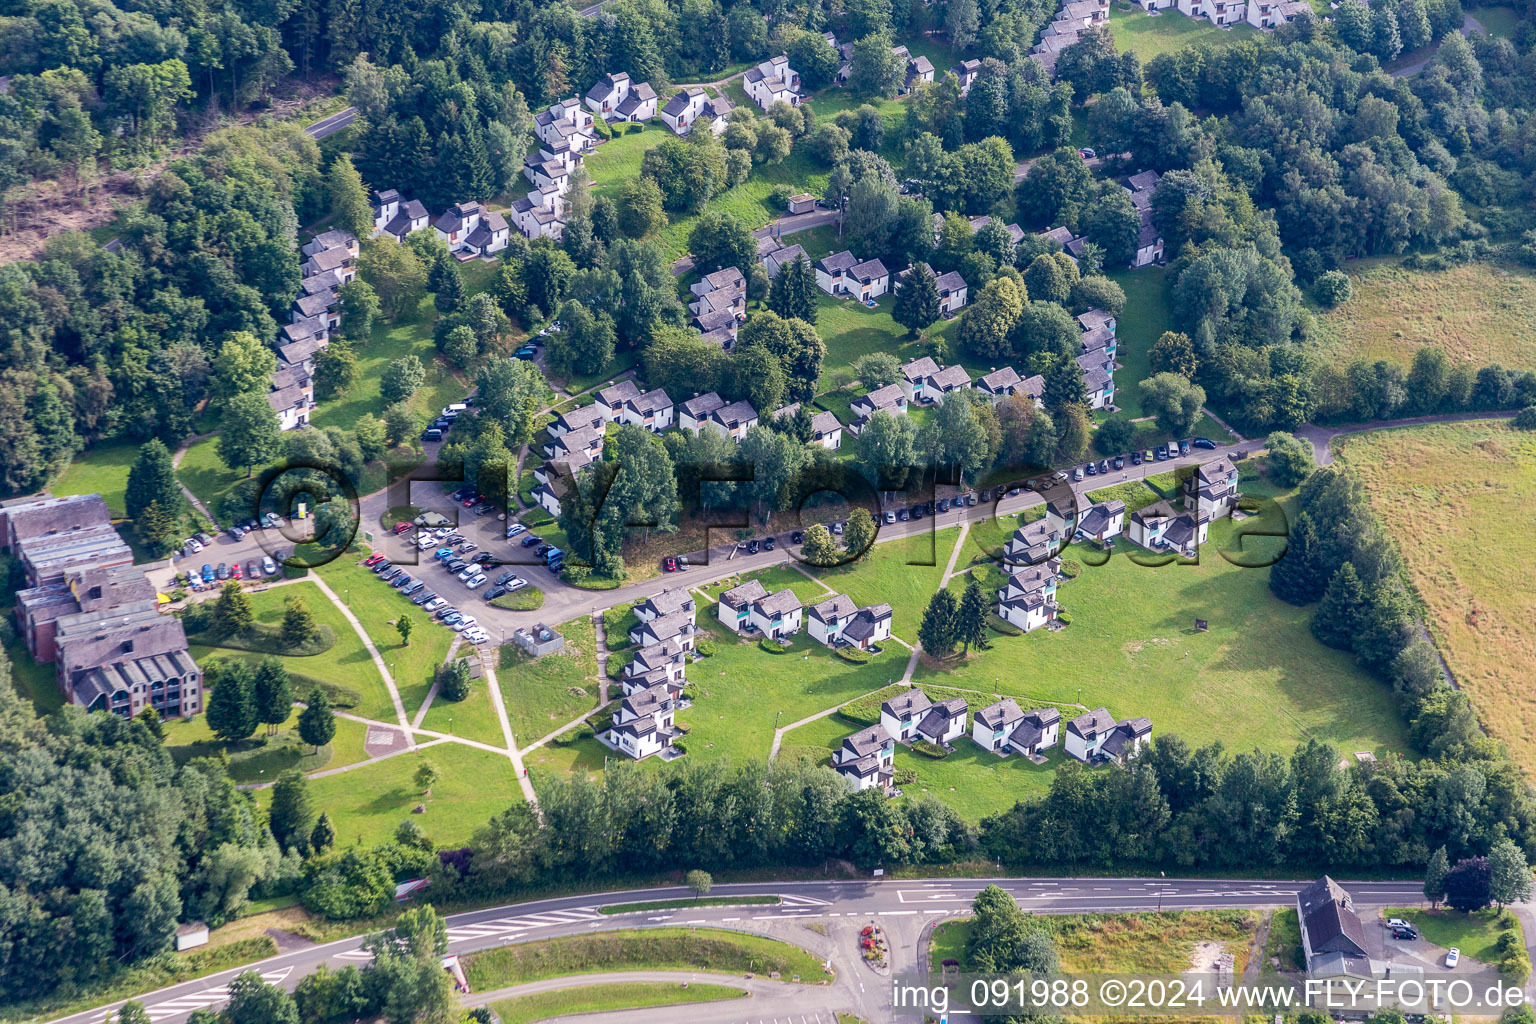 Aerial view of Holiday house plant of the park Ferienpark Hambachtal in Oberhambach in the state Rhineland-Palatinate, Germany